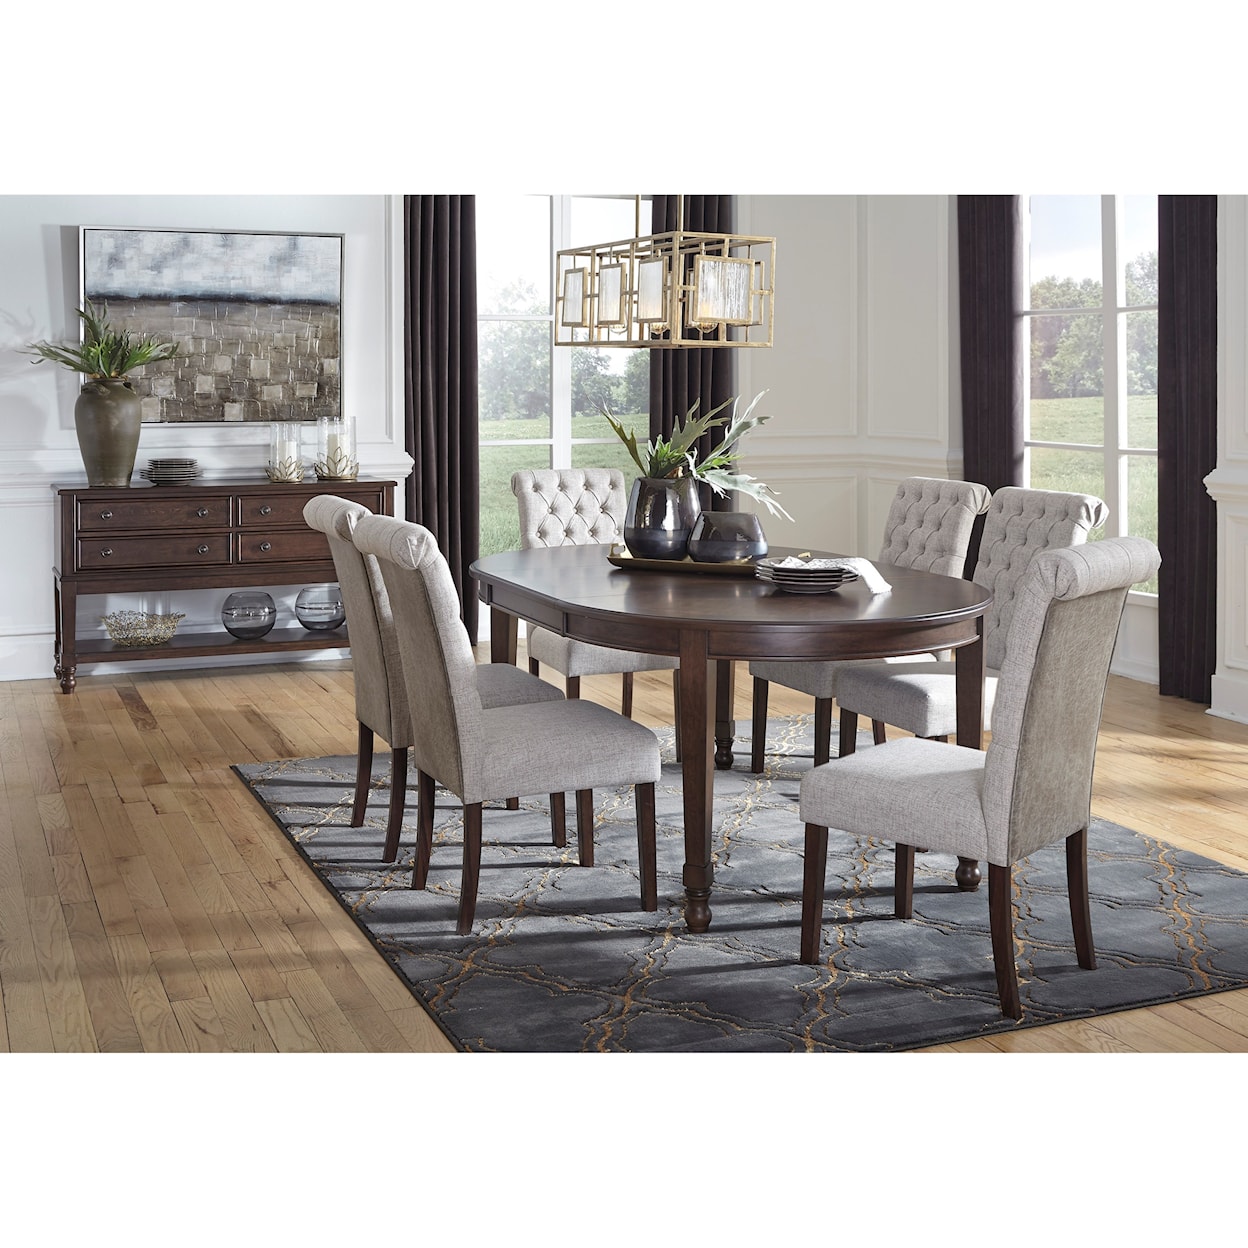 Benchcraft Adinton Formal Dining Room Group